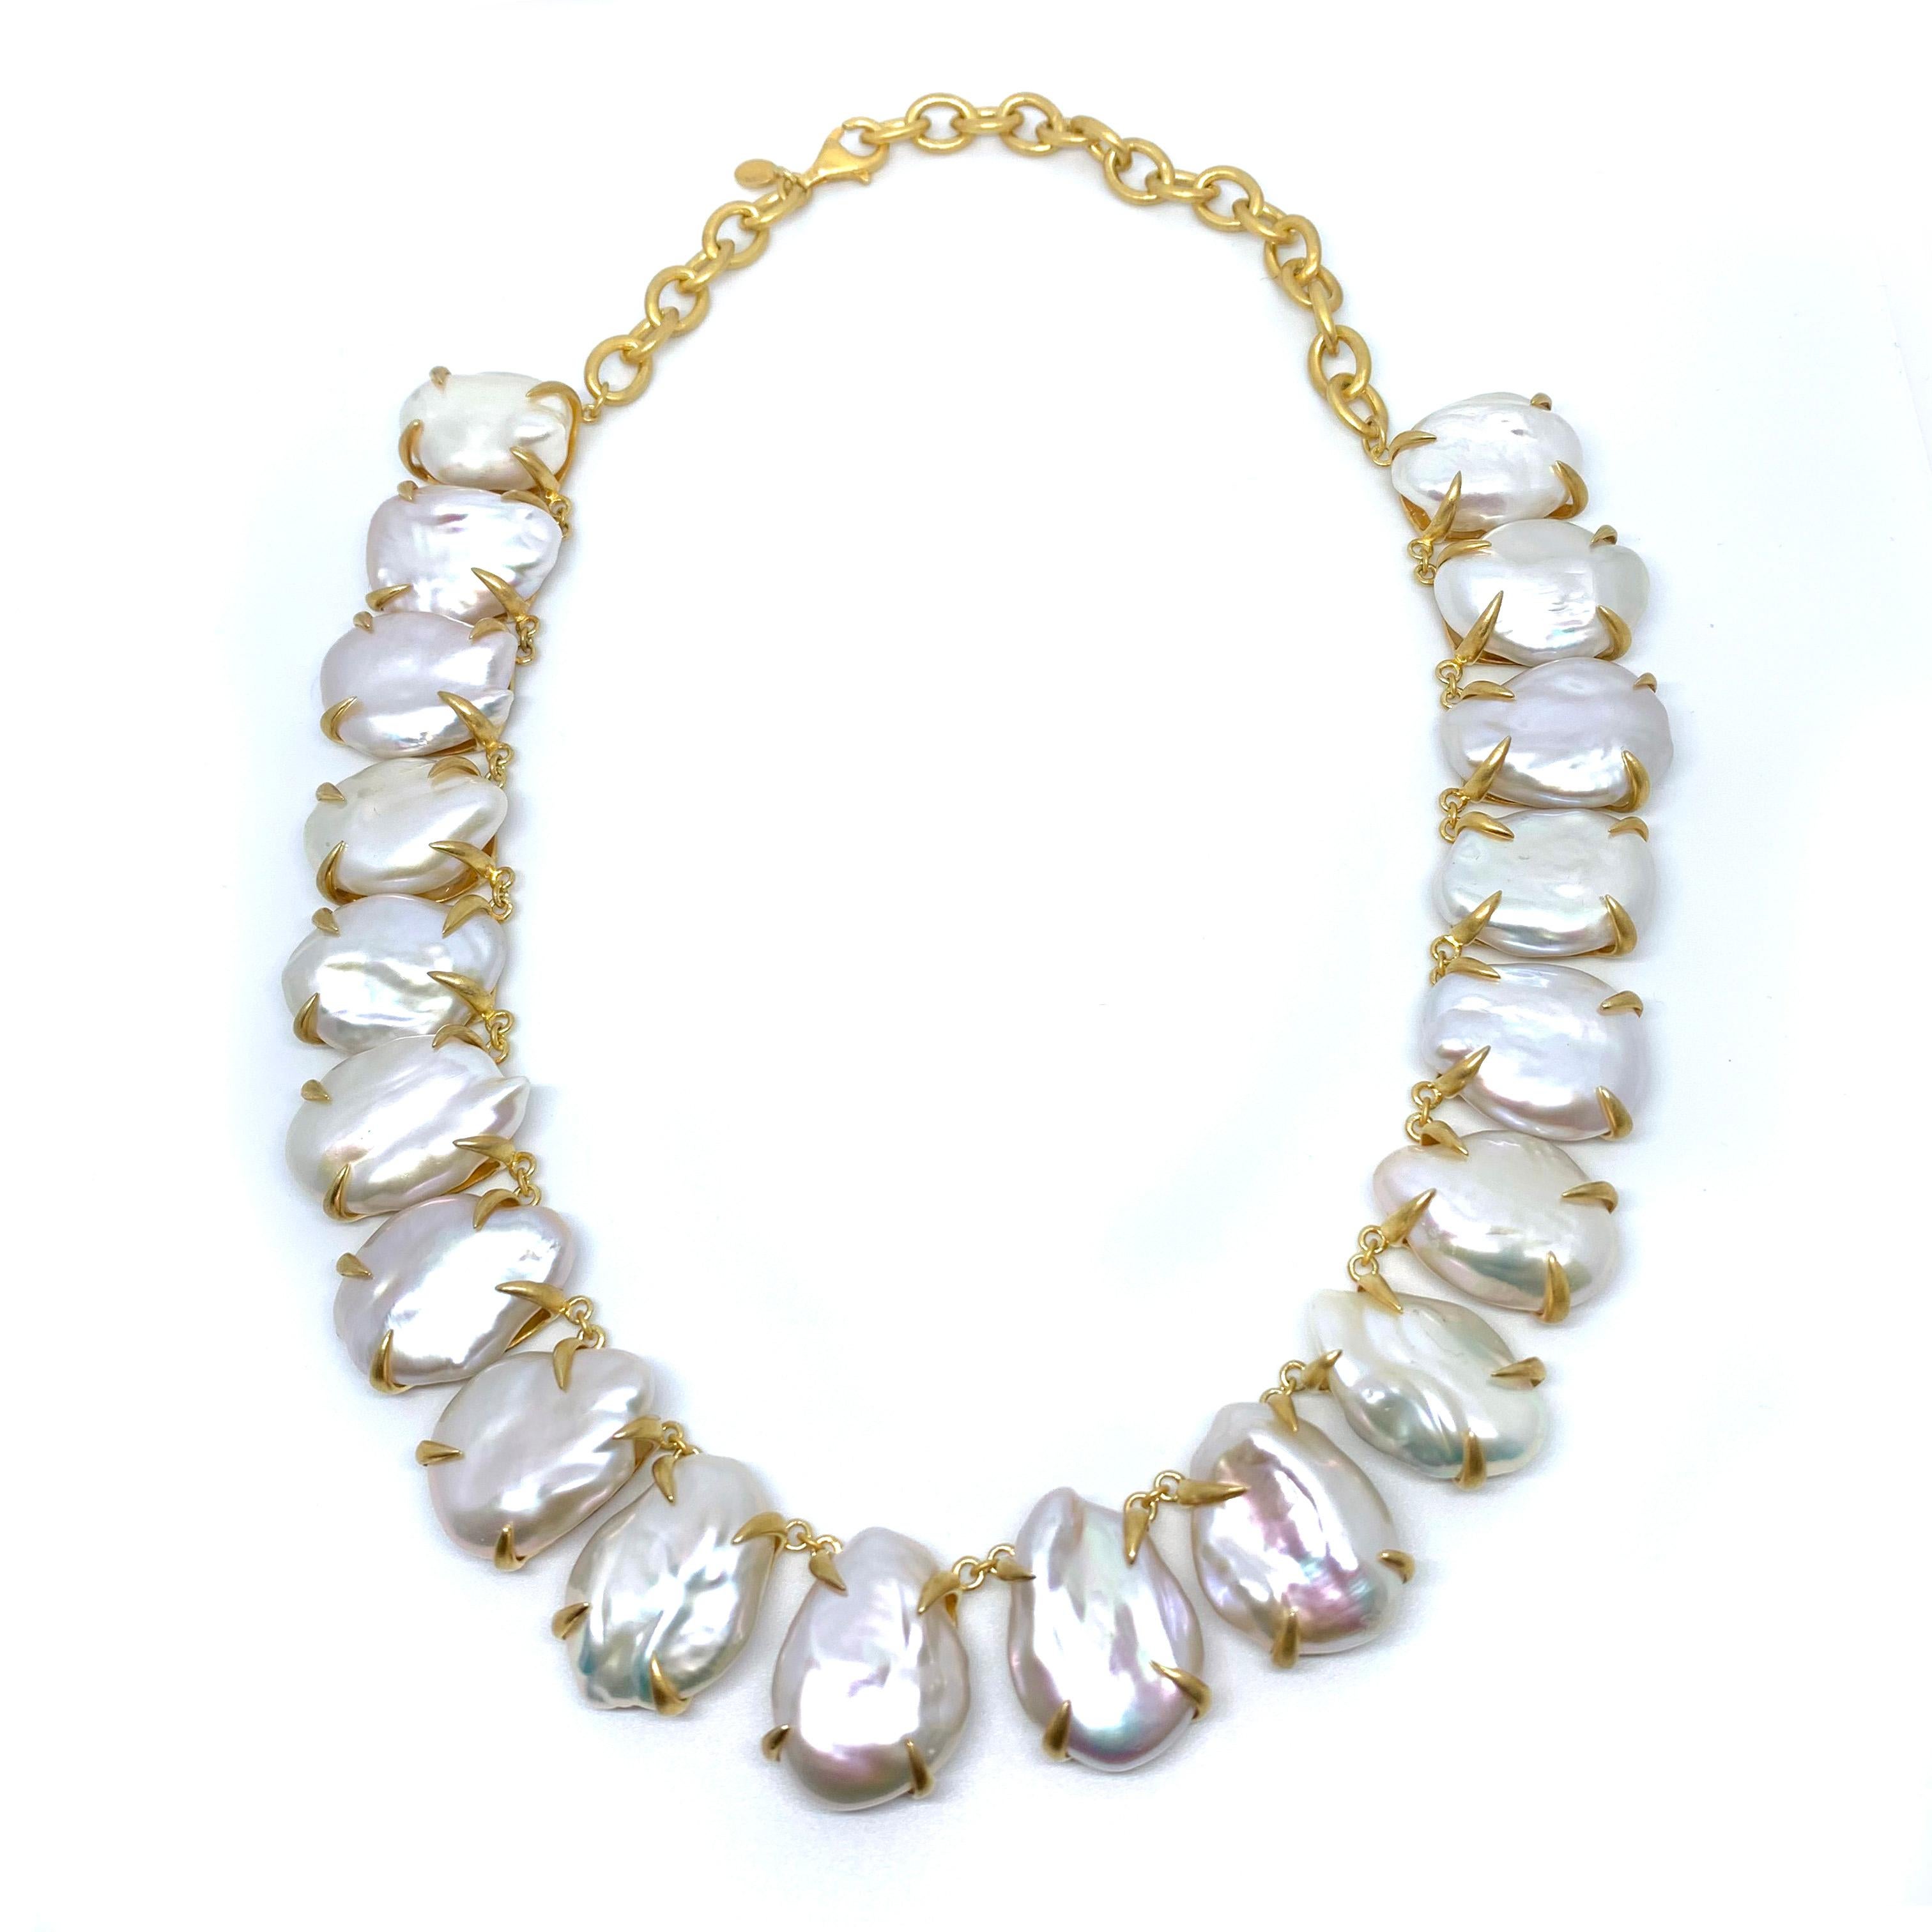 Stunning large lustrous white baroque pearl necklace. The necklace features 19 pieces of beautiful high-luster cultured white flat baroque pearls, handset in 18k yellow gold vermeil over sterling silver with brush satin matte finish. Each pearl